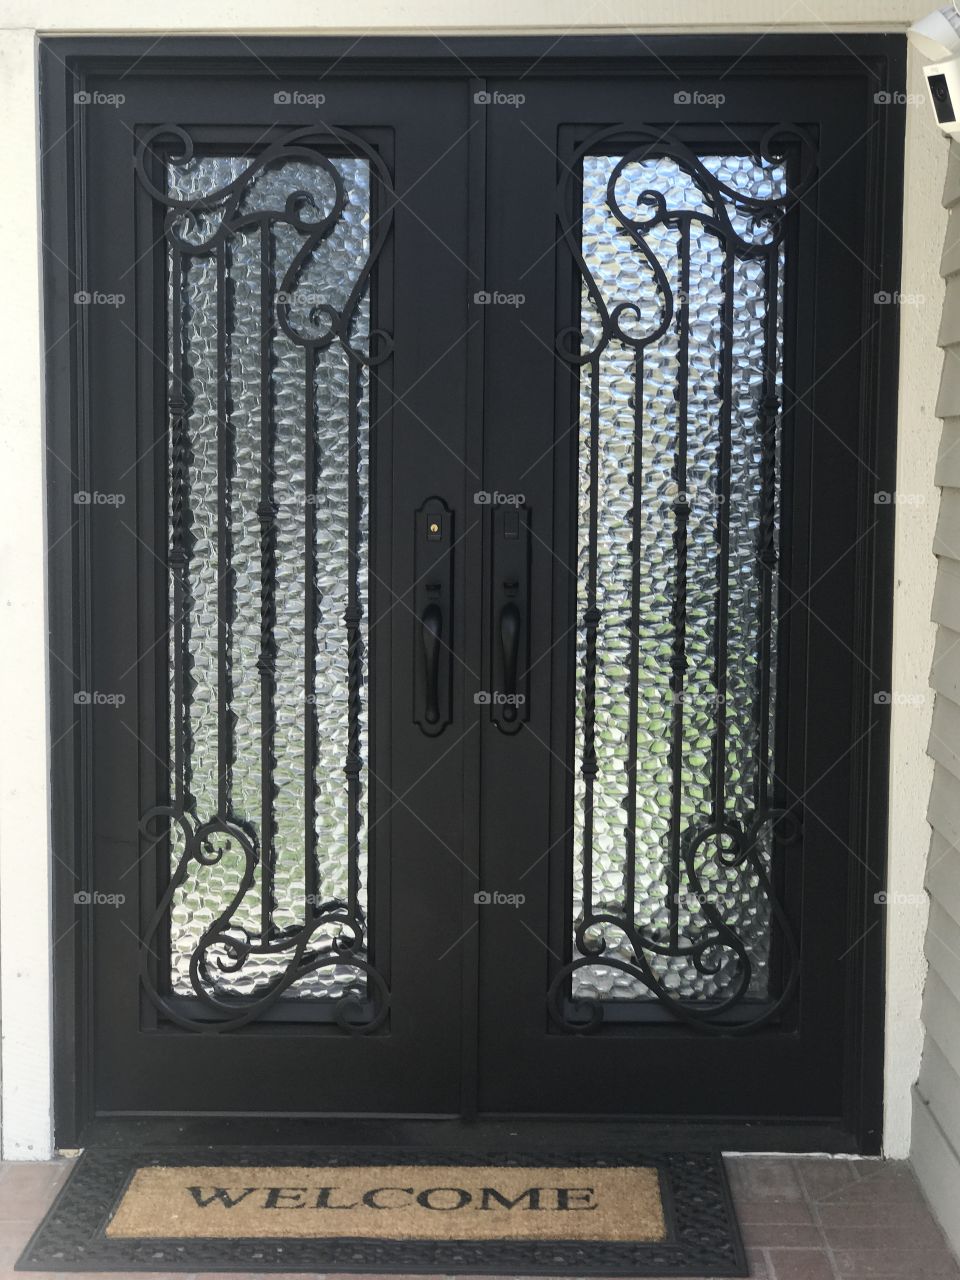 Our new cast iron front door. Now I feel extra safe.